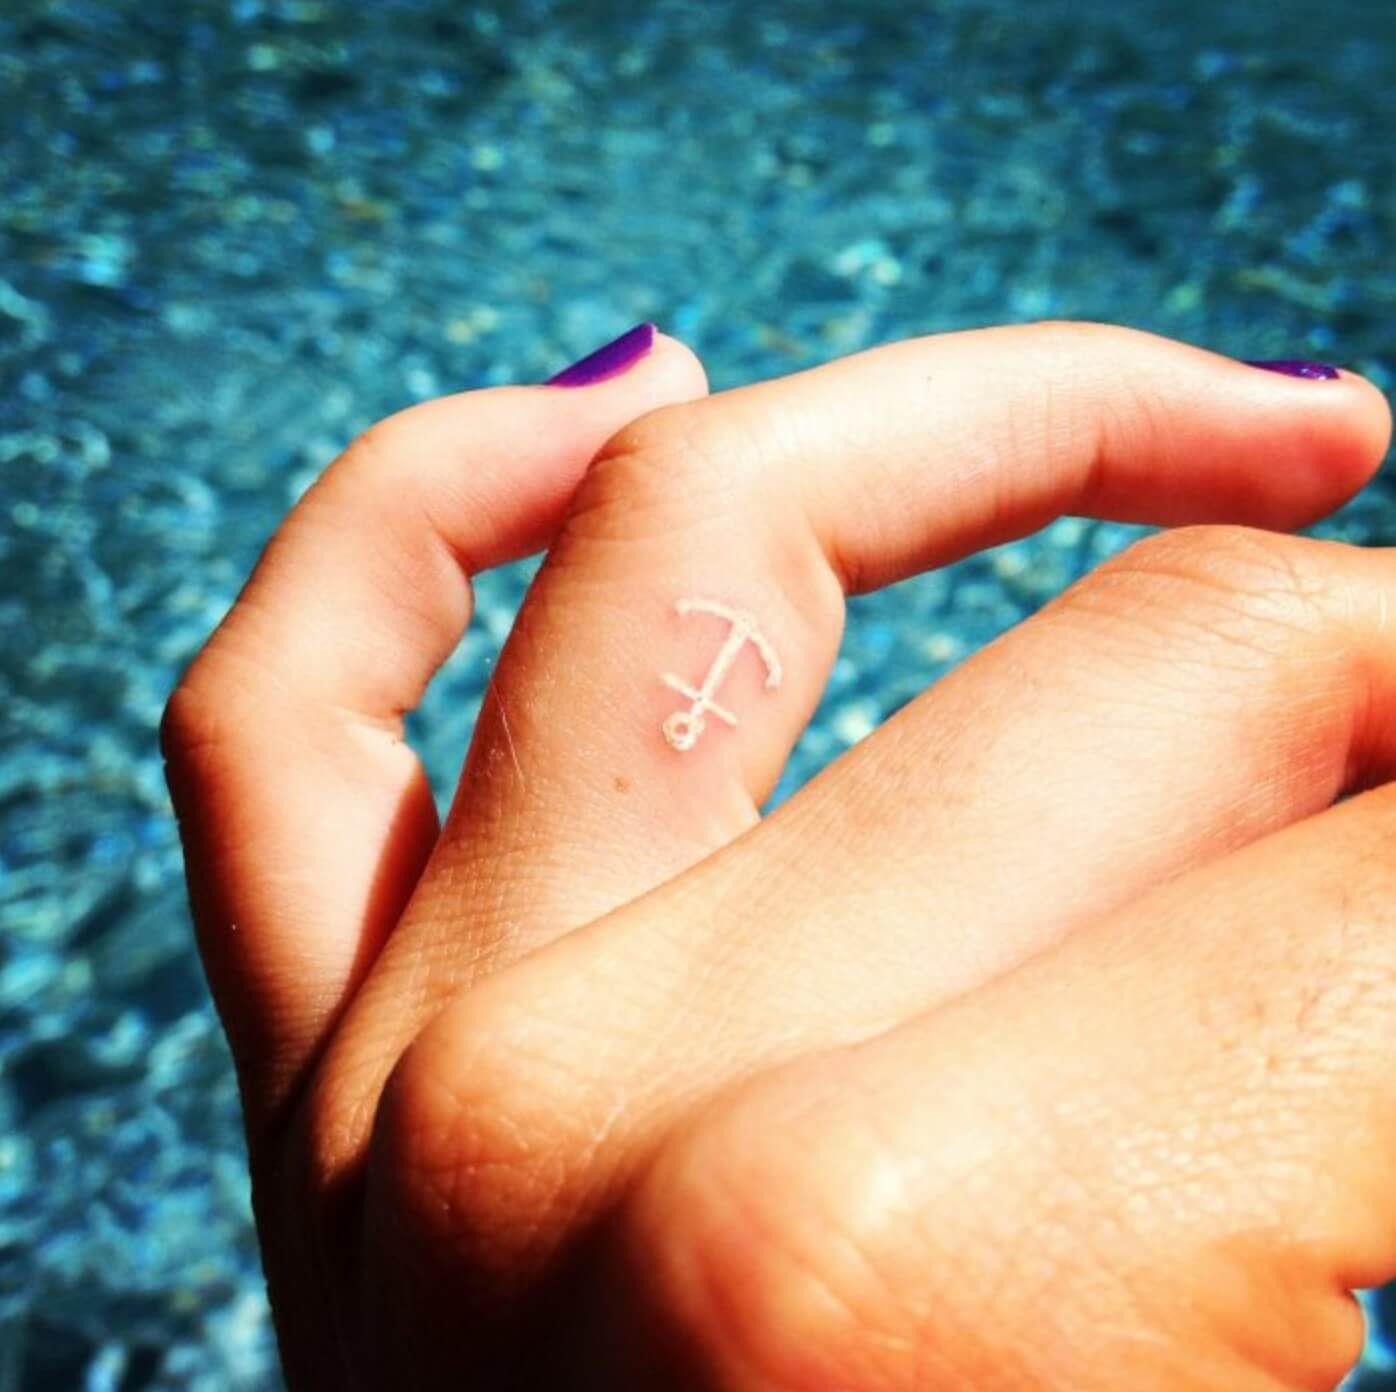 Tattoo created with white ink in the form of an anchor placed on the middle finger